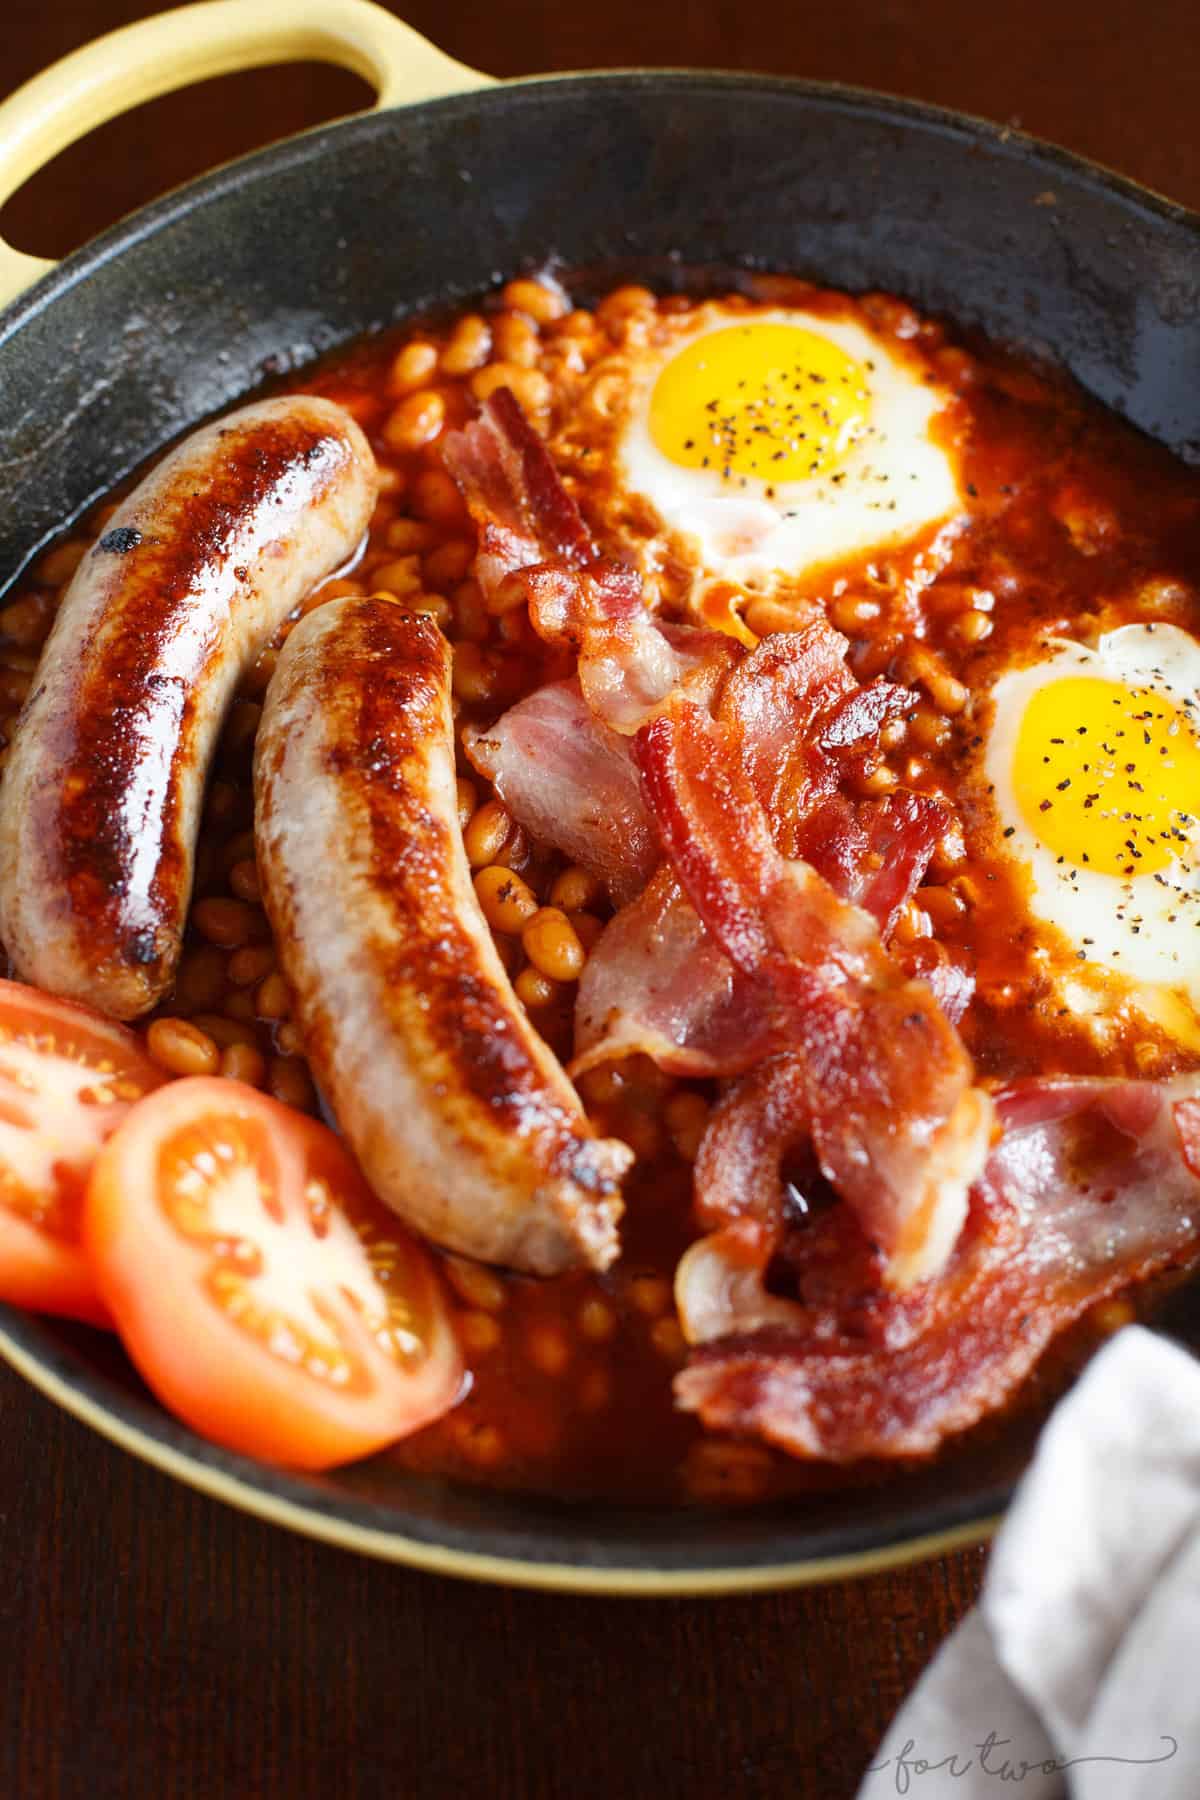 If you're yearning for a taste of London, this skillet English breakfast will satisfy your cravings in the States!